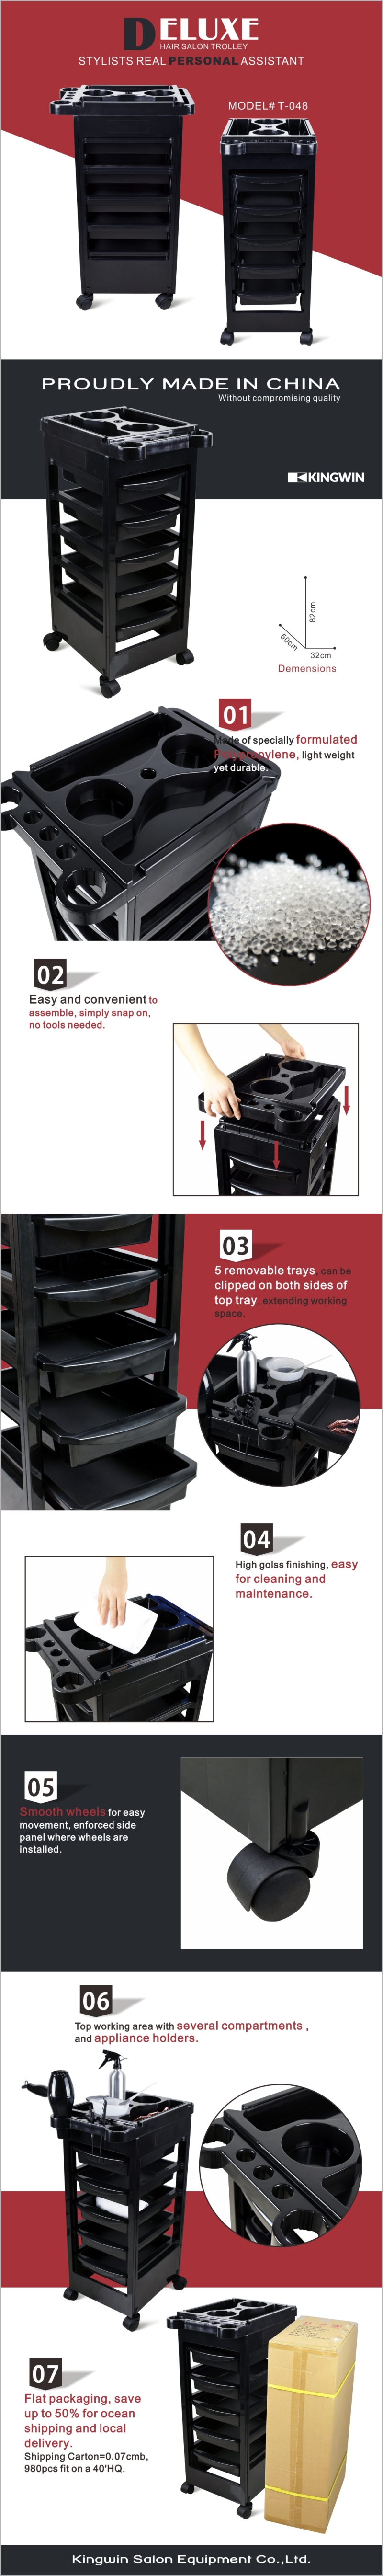 Professional Hairdressing Salon Tool Trolley 